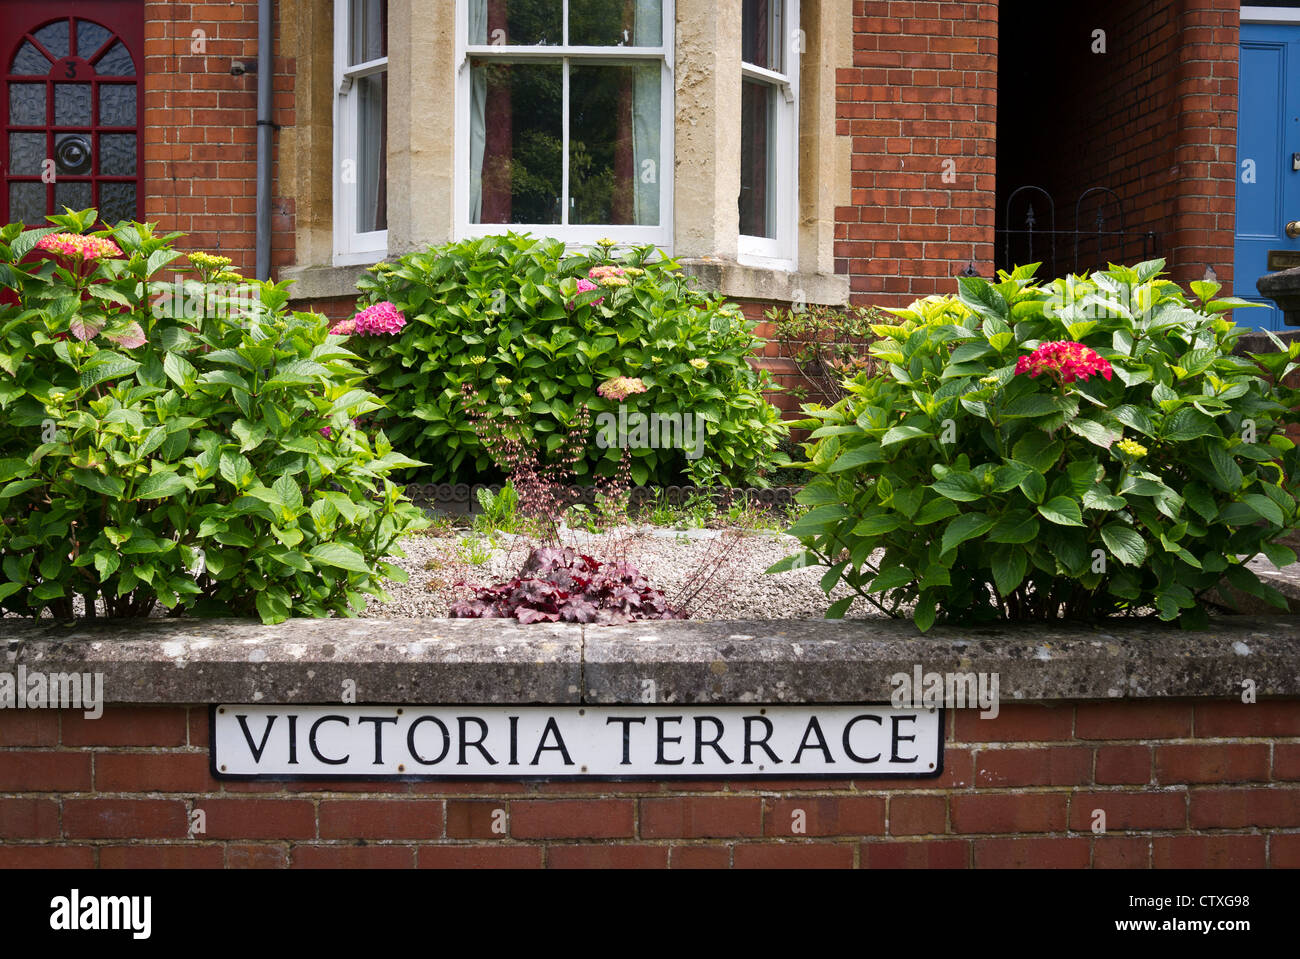 VICTORIA TERRACE and small front town garden with flowering perennials Stock Photo